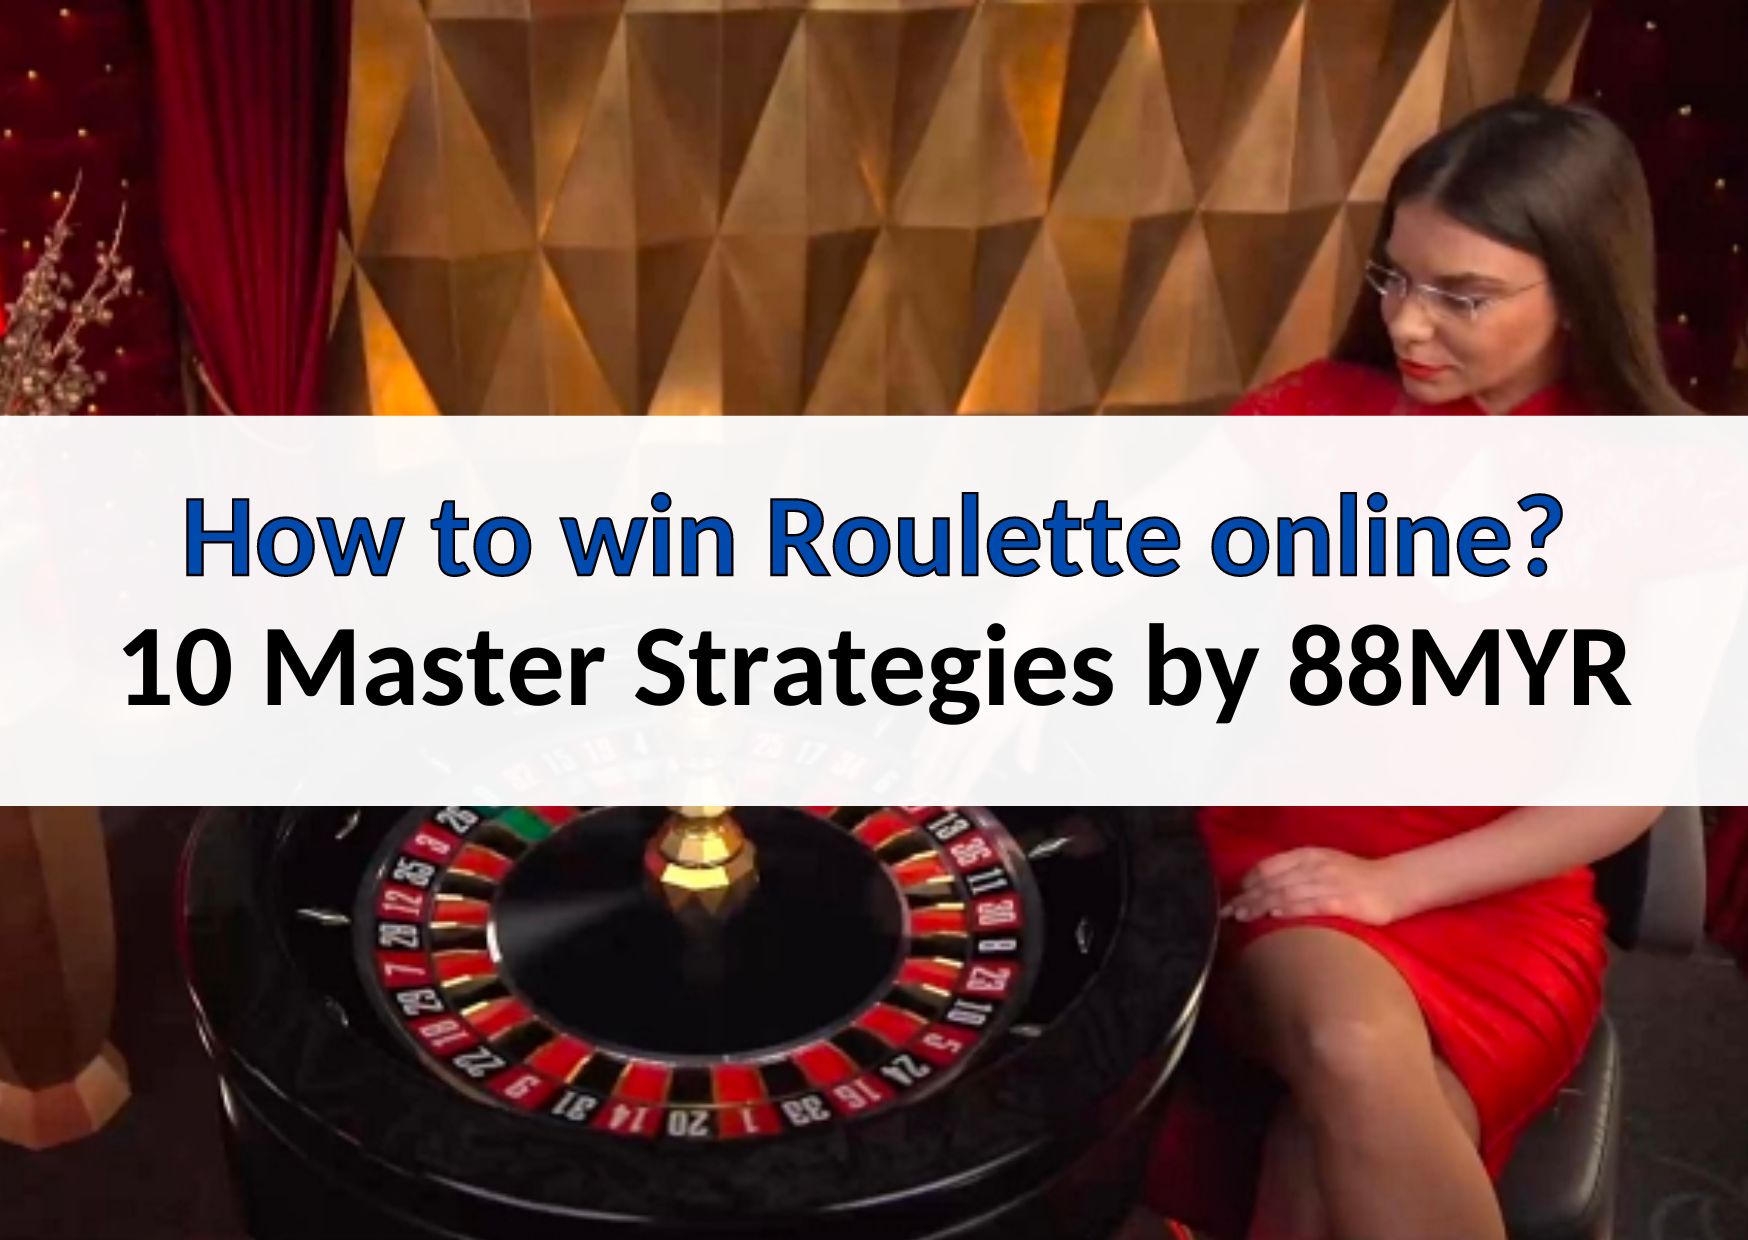 How to win Roulette online every spin - 10 Master Strategies